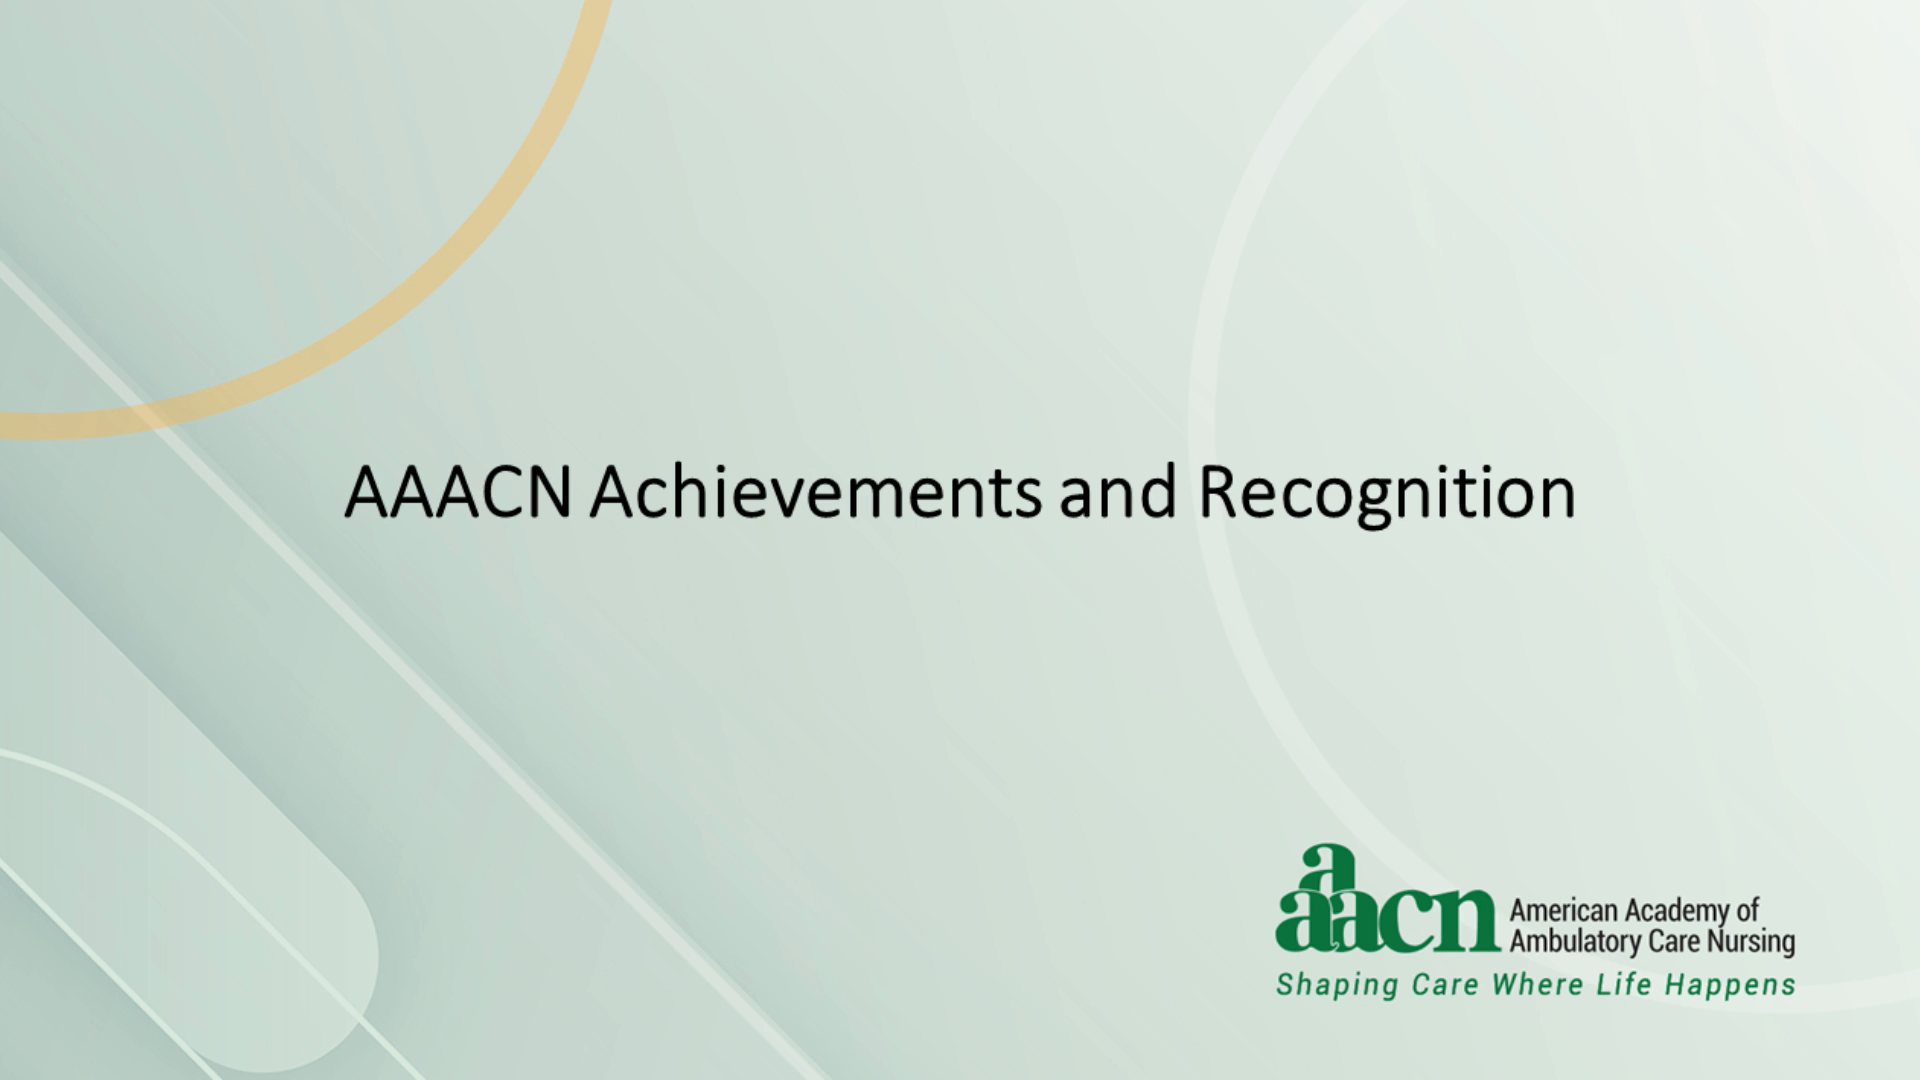 AAACN Achievements and Recognition